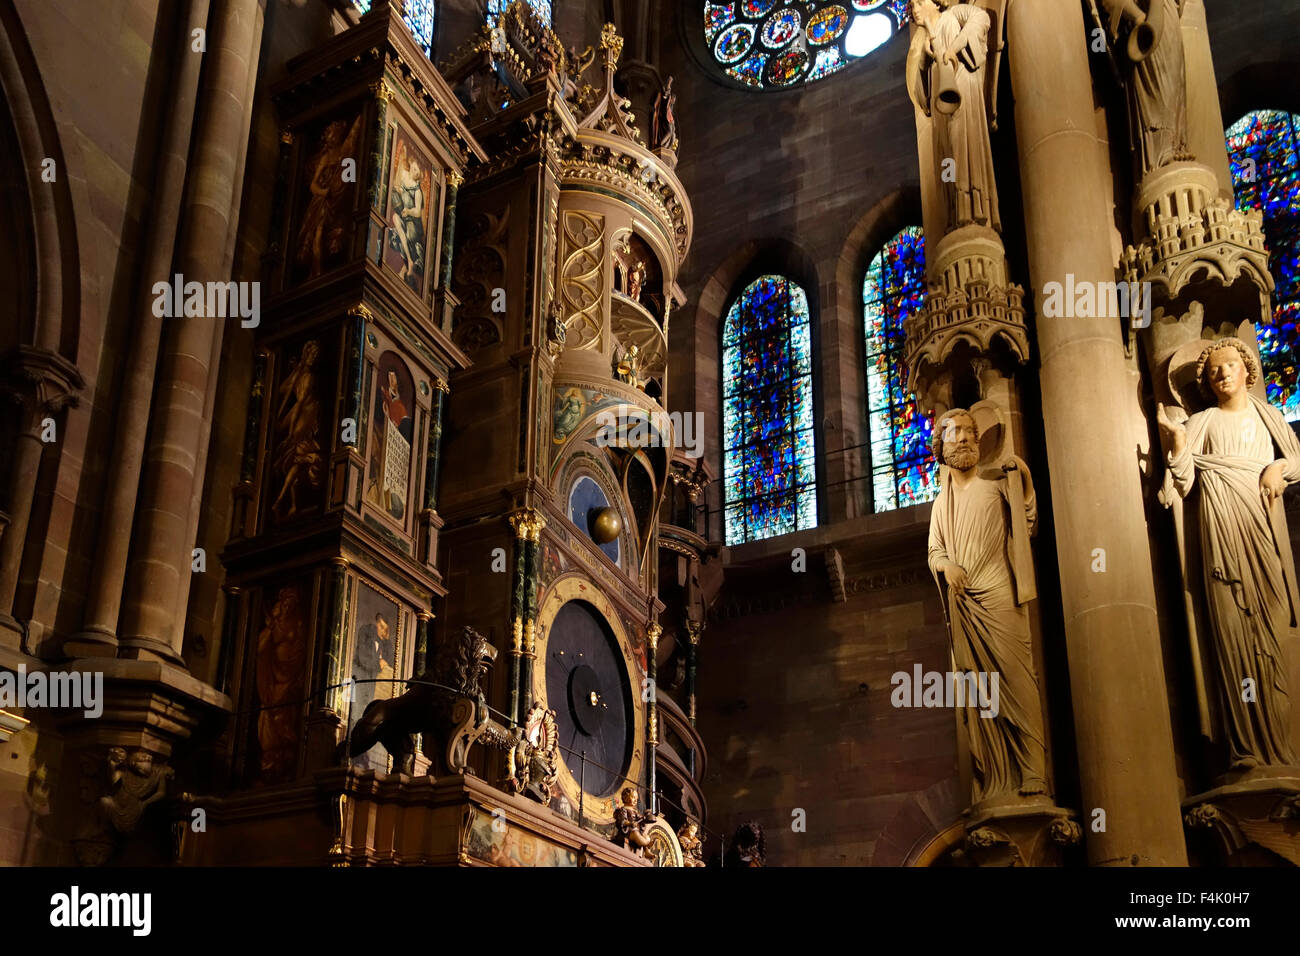 Astronomical clock and pillar of angels in the Cathedral of Our Lady of Strasbourg / Cathédrale Notre-Dame de Strasbourg, France Stock Photo